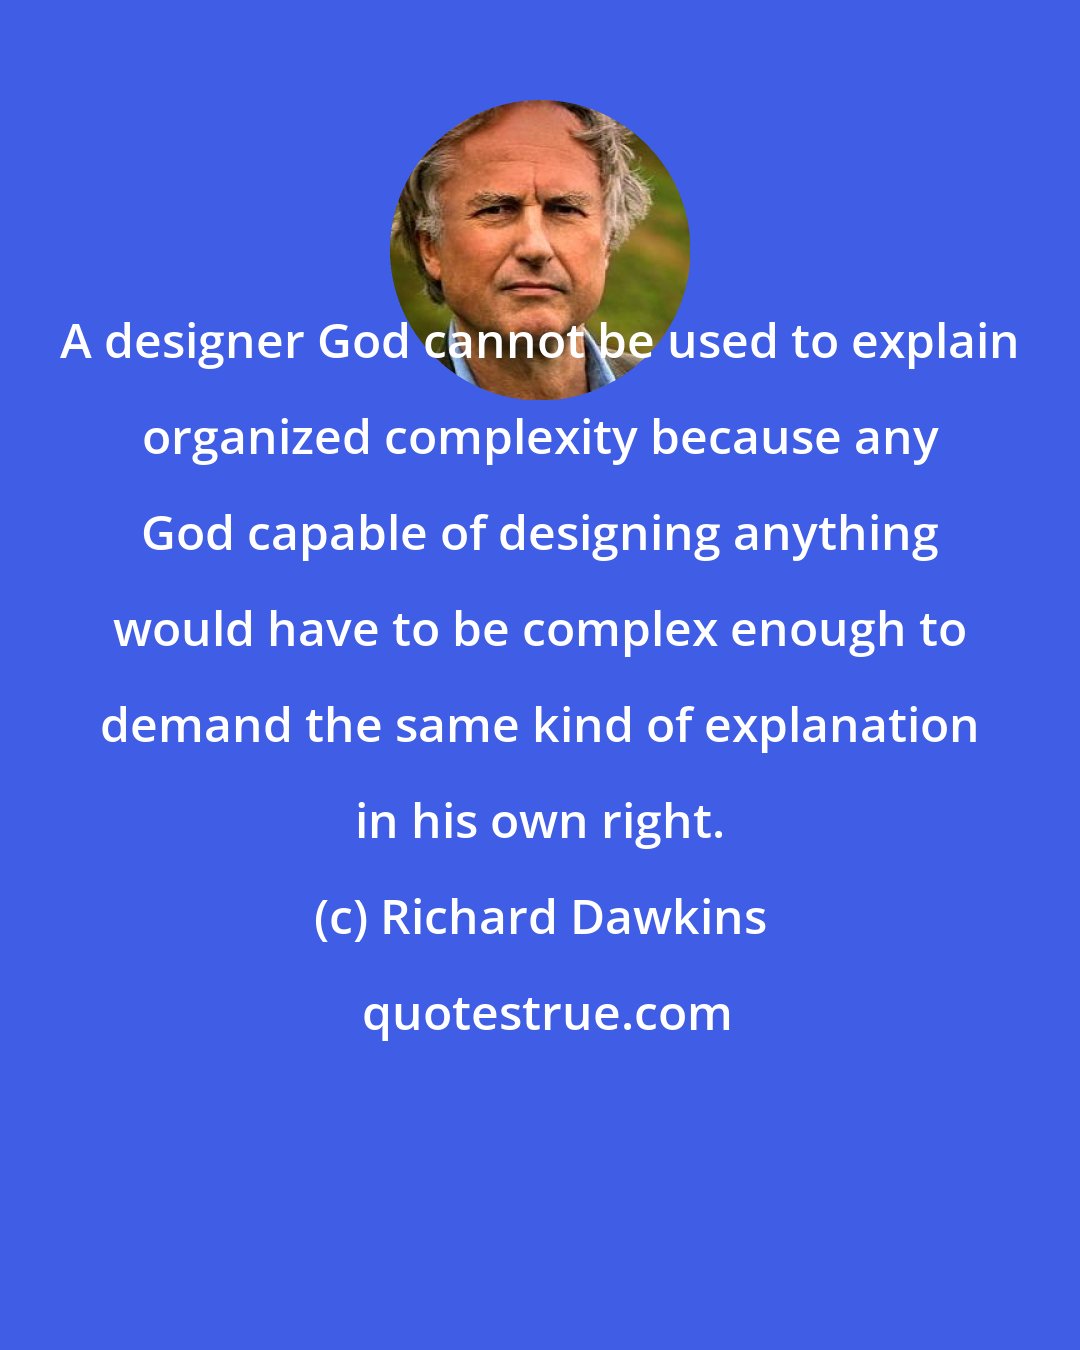 Richard Dawkins: A designer God cannot be used to explain organized complexity because any God capable of designing anything would have to be complex enough to demand the same kind of explanation in his own right.